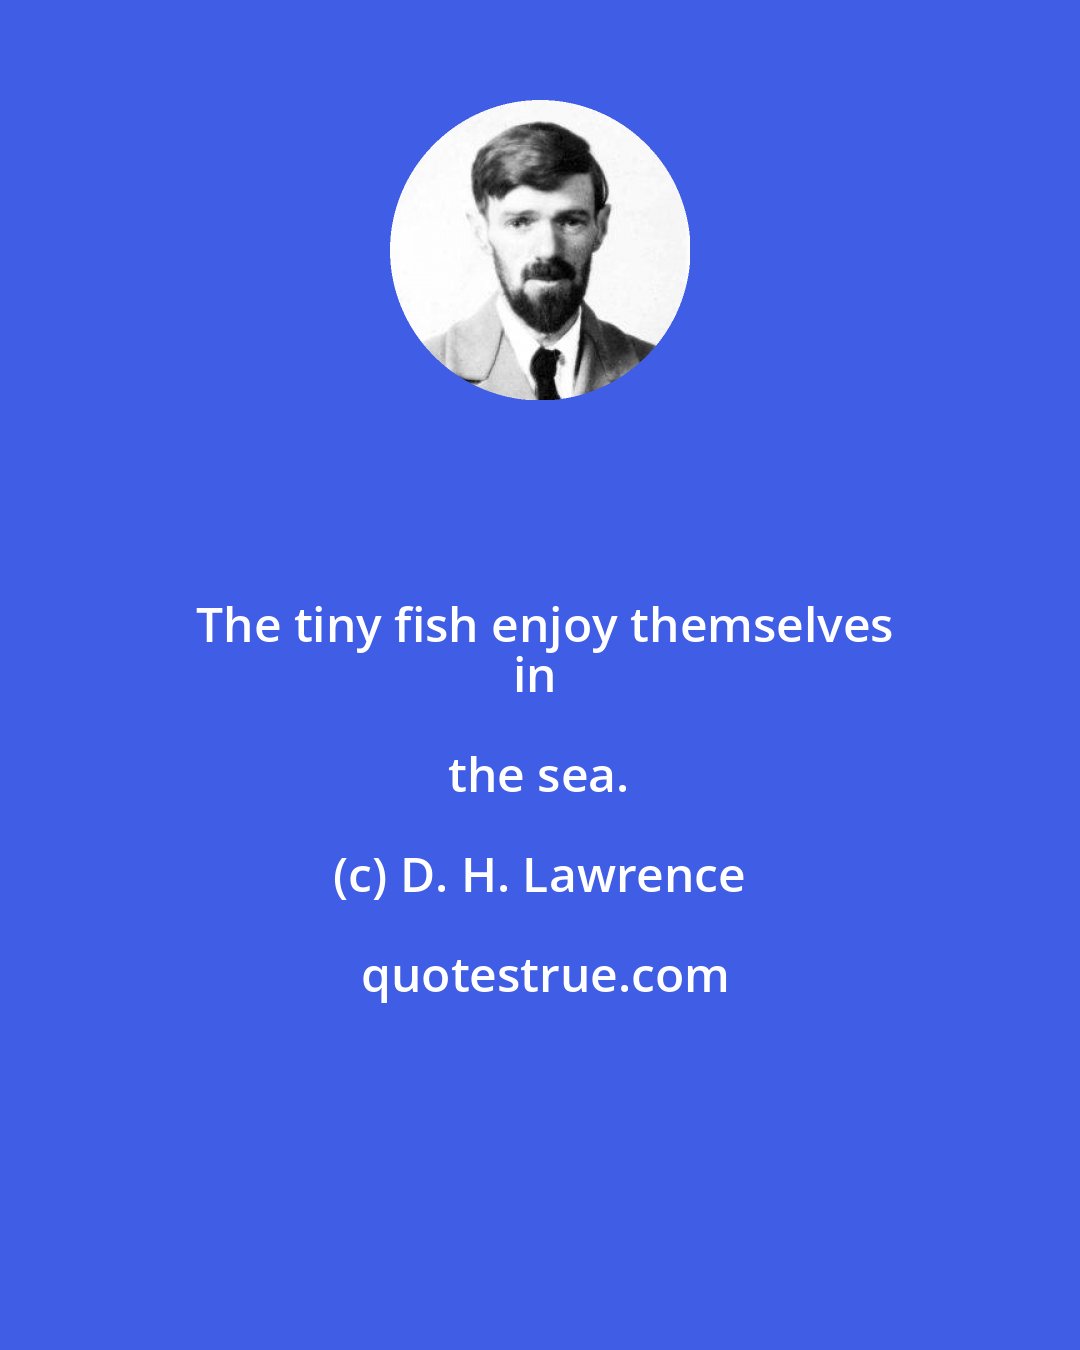 D. H. Lawrence: The tiny fish enjoy themselves
in the sea.